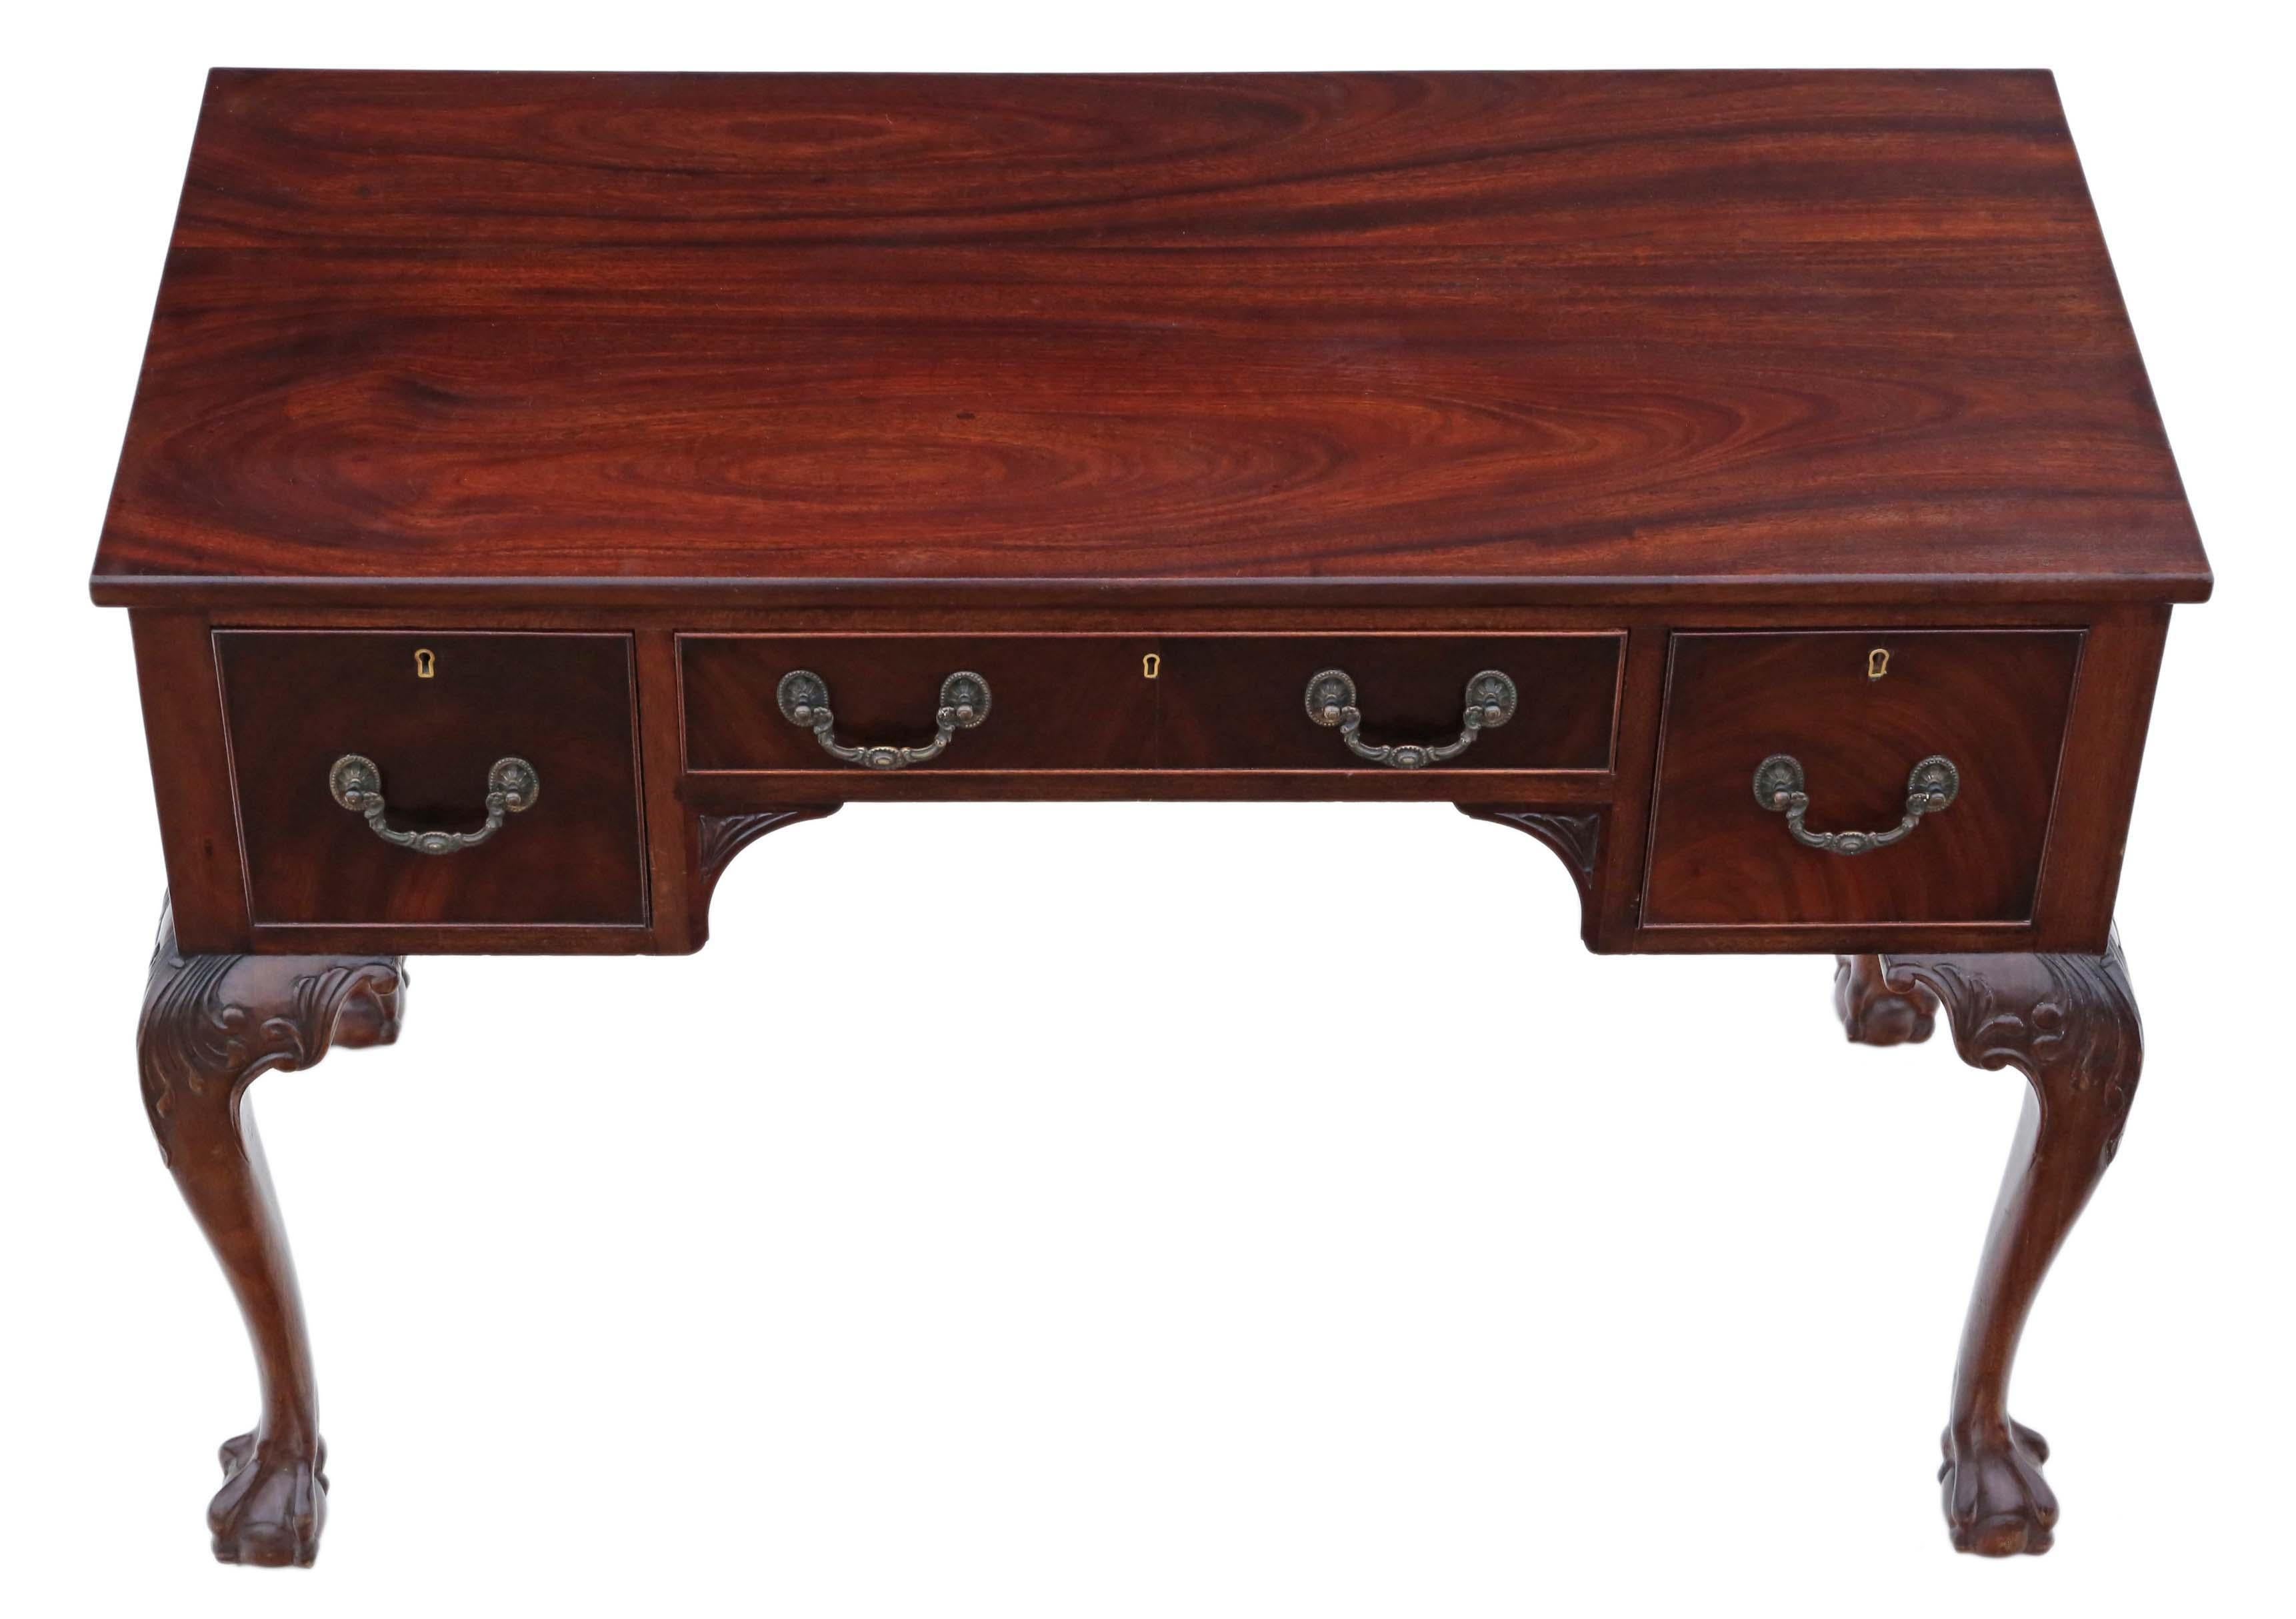 Antique fine quality C1910 mahogany writing desk or dressing table. Stamped W.FOWKES.

Solid heavy, no loose joints and no woodworm. Full of age, character and charm. The drawers slide freely. A rare and attractive quality find.

Would look